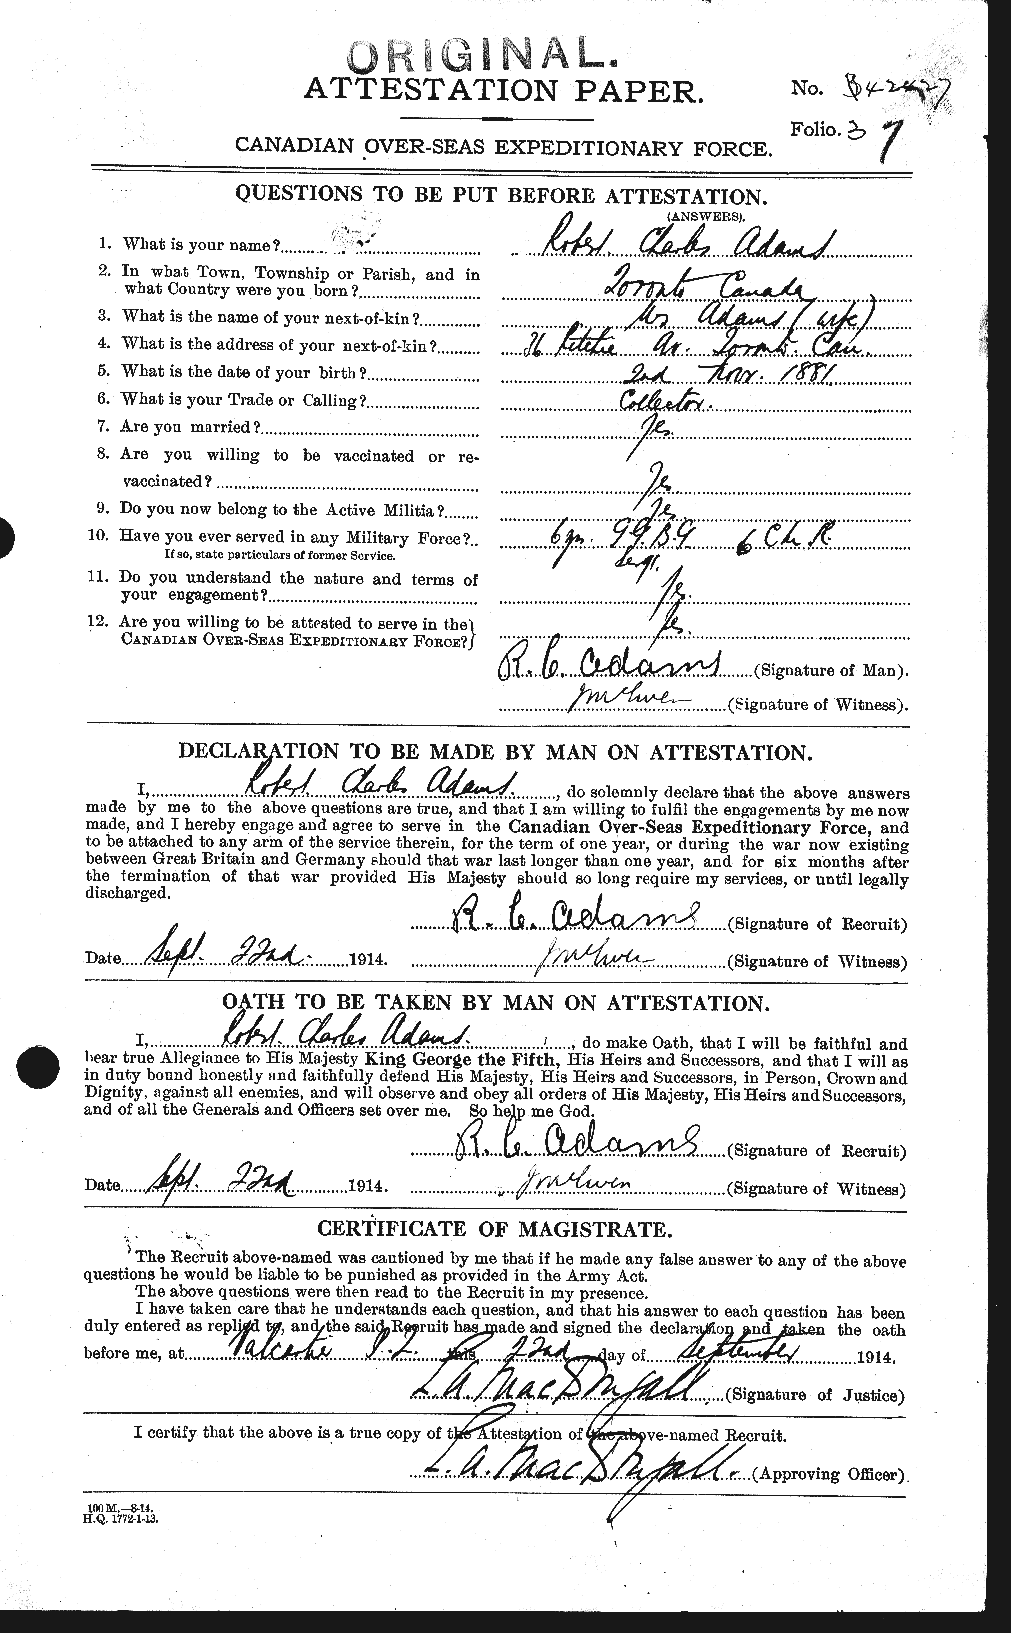 Personnel Records of the First World War - CEF 202100a